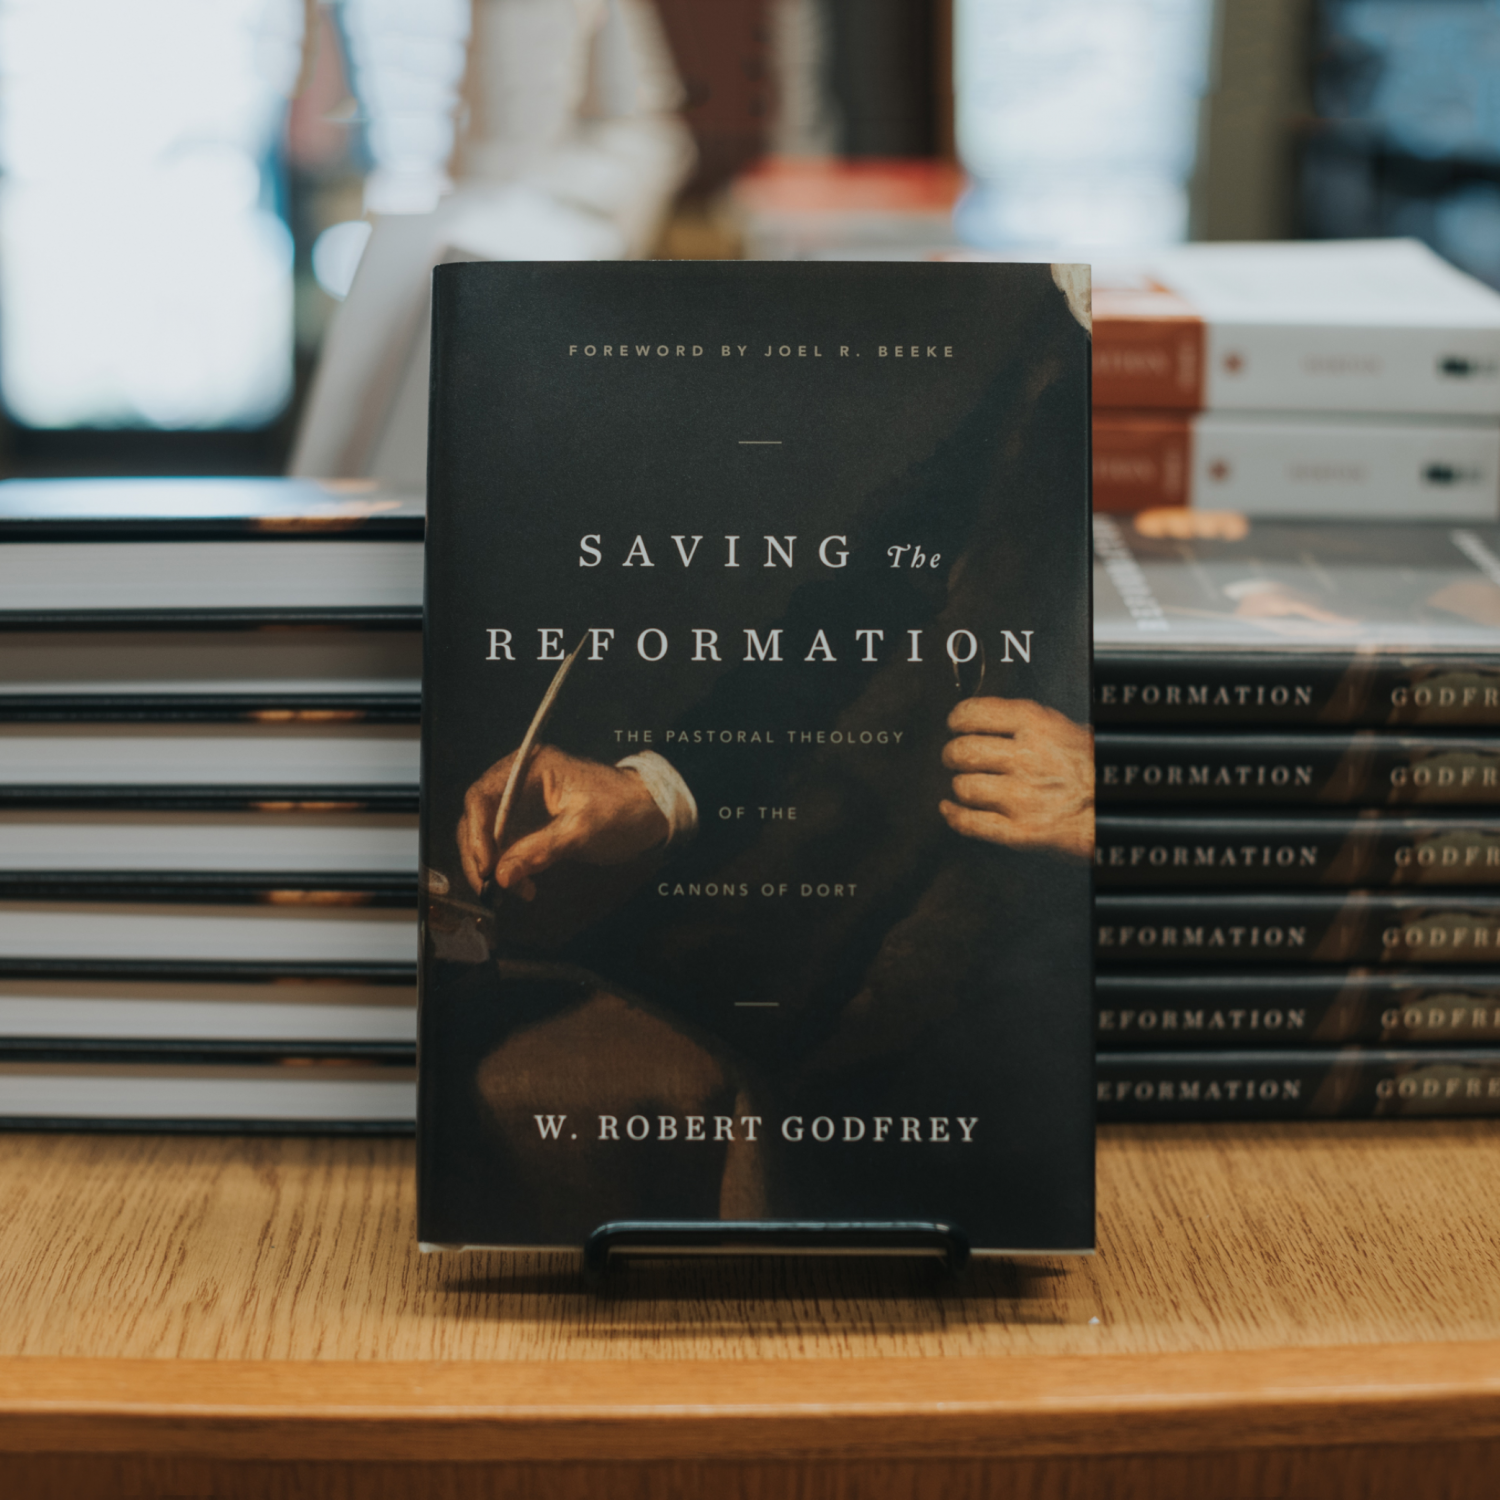 Saving the Reformation book by Dr. W. Robert Godfrey